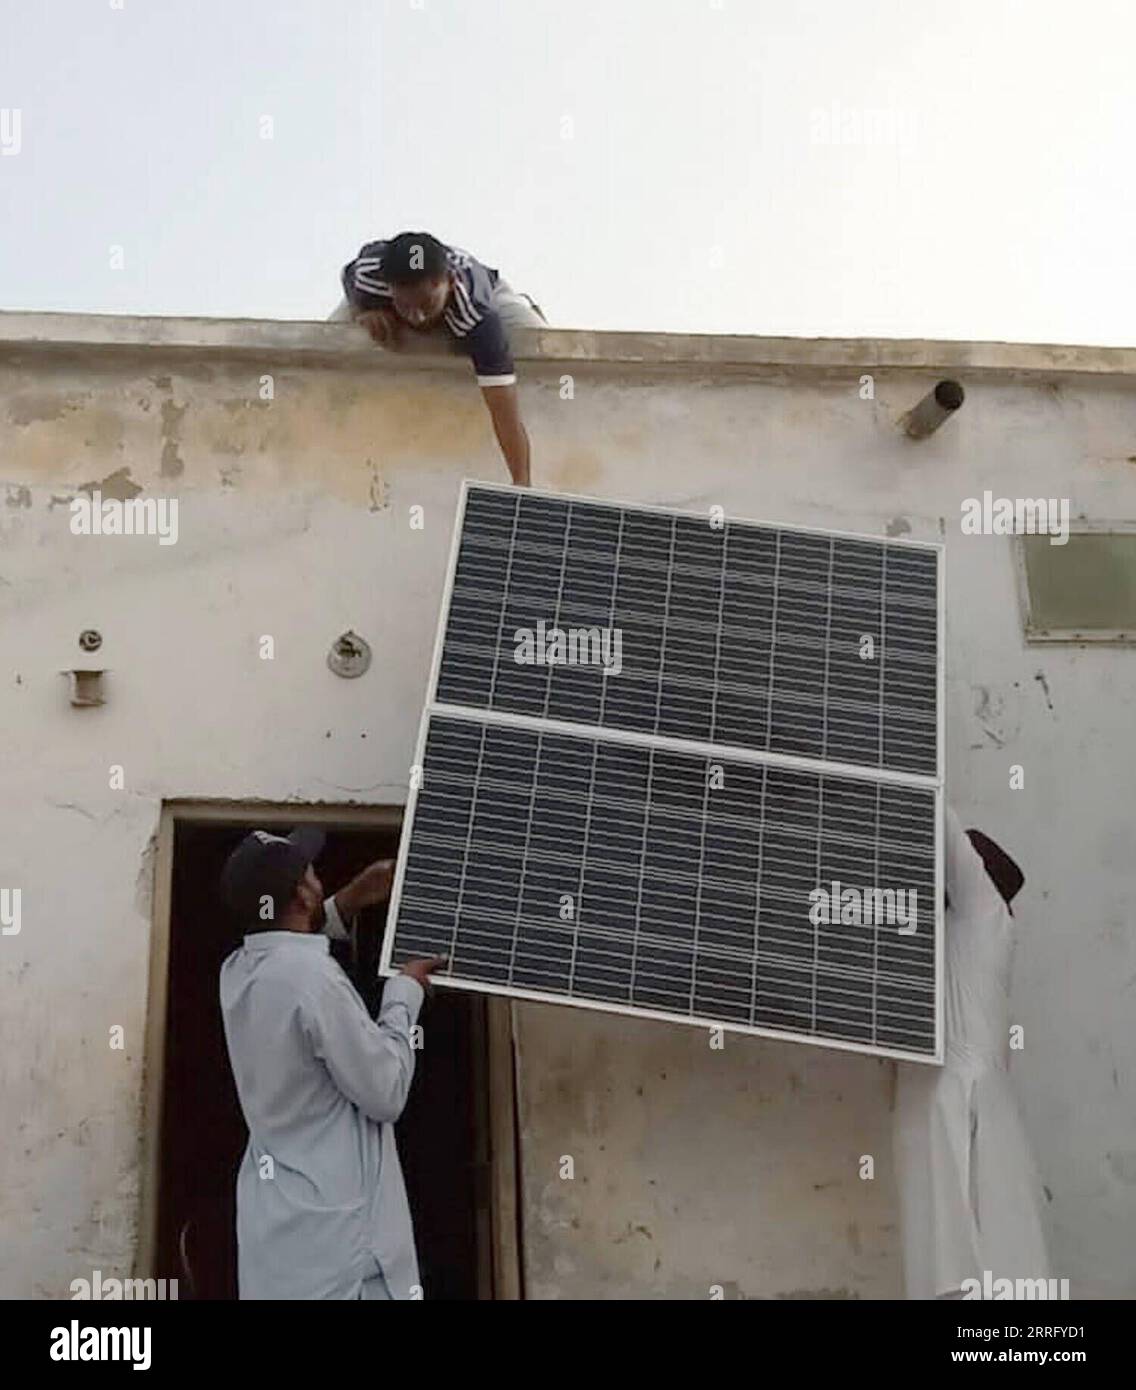 220430 -- GWADAR, April 30, 2022 -- Workers install a China-donated solar panel at a house in Gwadar, Pakistan, March 14, 2022. TO GO WITH Feature: Chinese aid illuminates houses, helps fishermen in Pakistan s Gwadar Str/Xinhua PAKISTAN-GWADAR-CHINA-AID-SOLAR SYSTEM Stringer PUBLICATIONxNOTxINxCHN Stock Photo